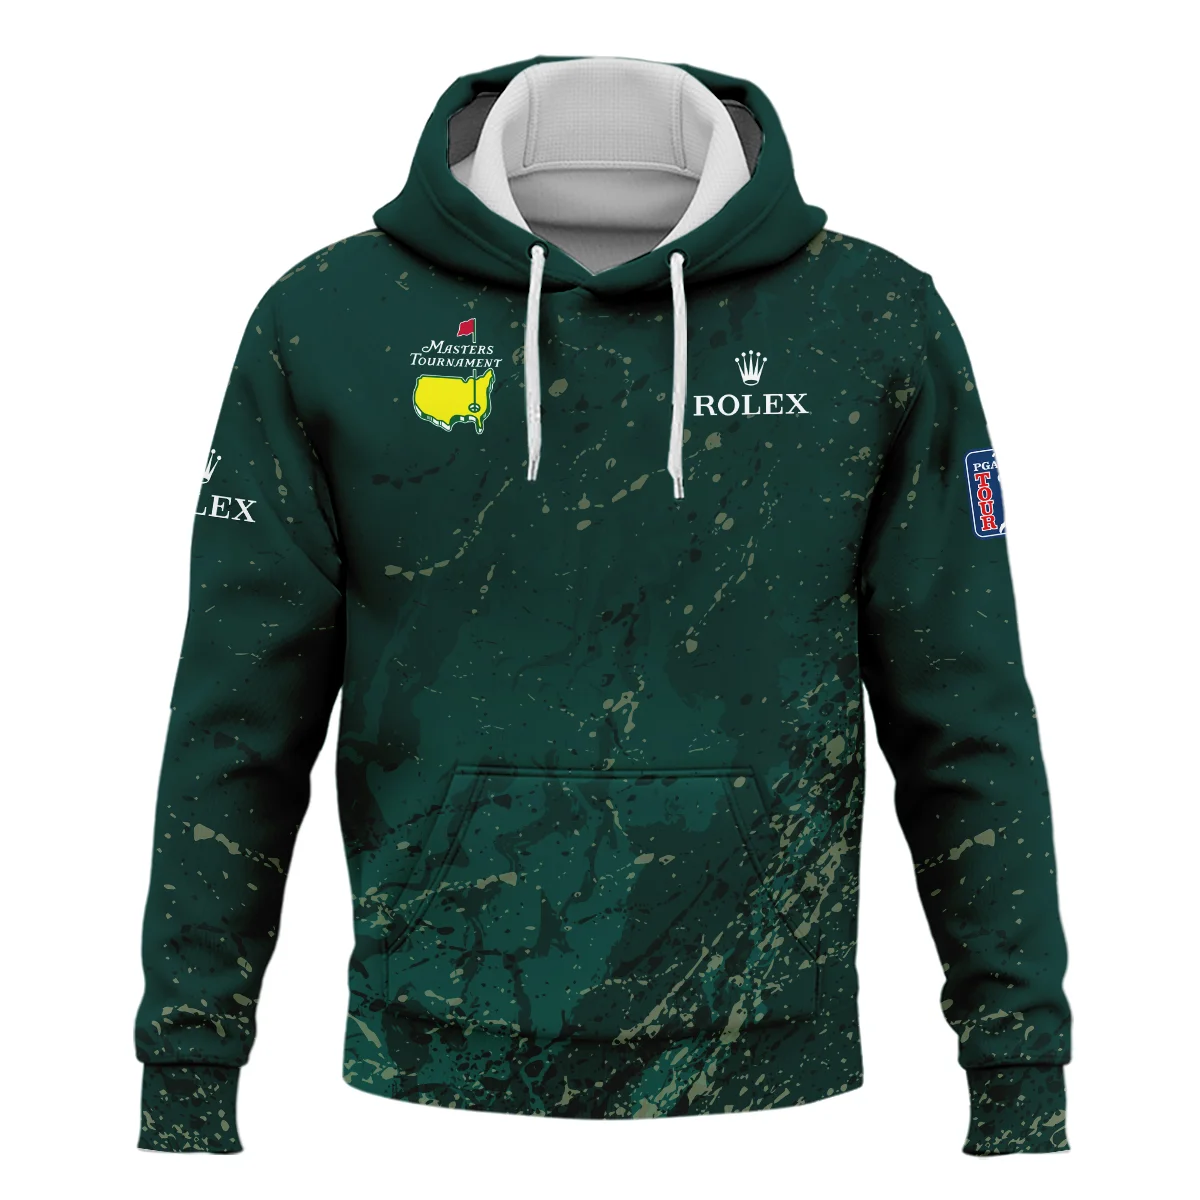 Old Cracked Texture With Gold Splash Paint Masters Tournament Rolex Hoodie Shirt Style Classic Hoodie Shirt